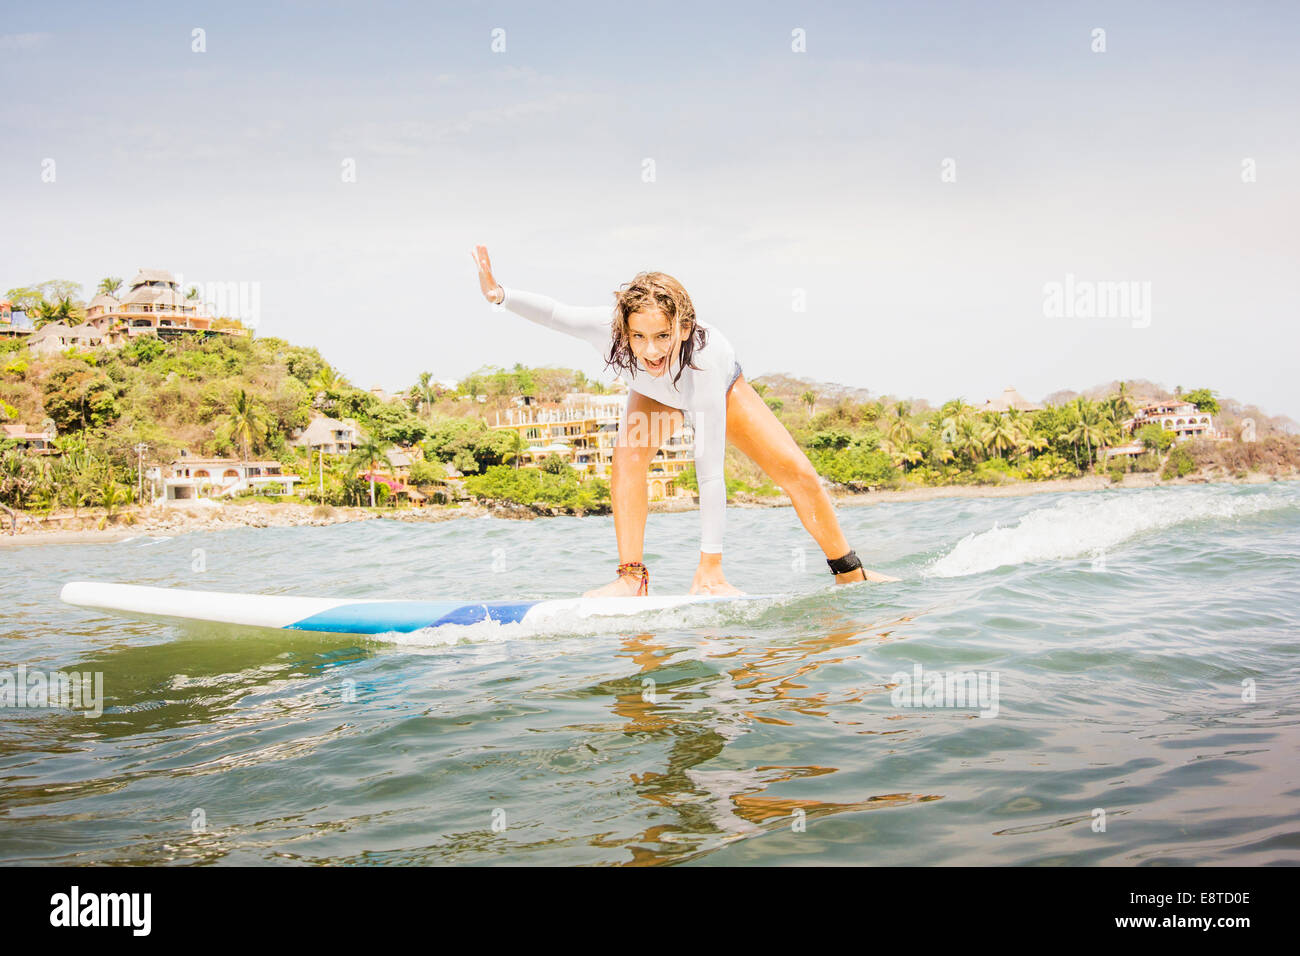 Mixed race girl surfing in waves Stock Photo